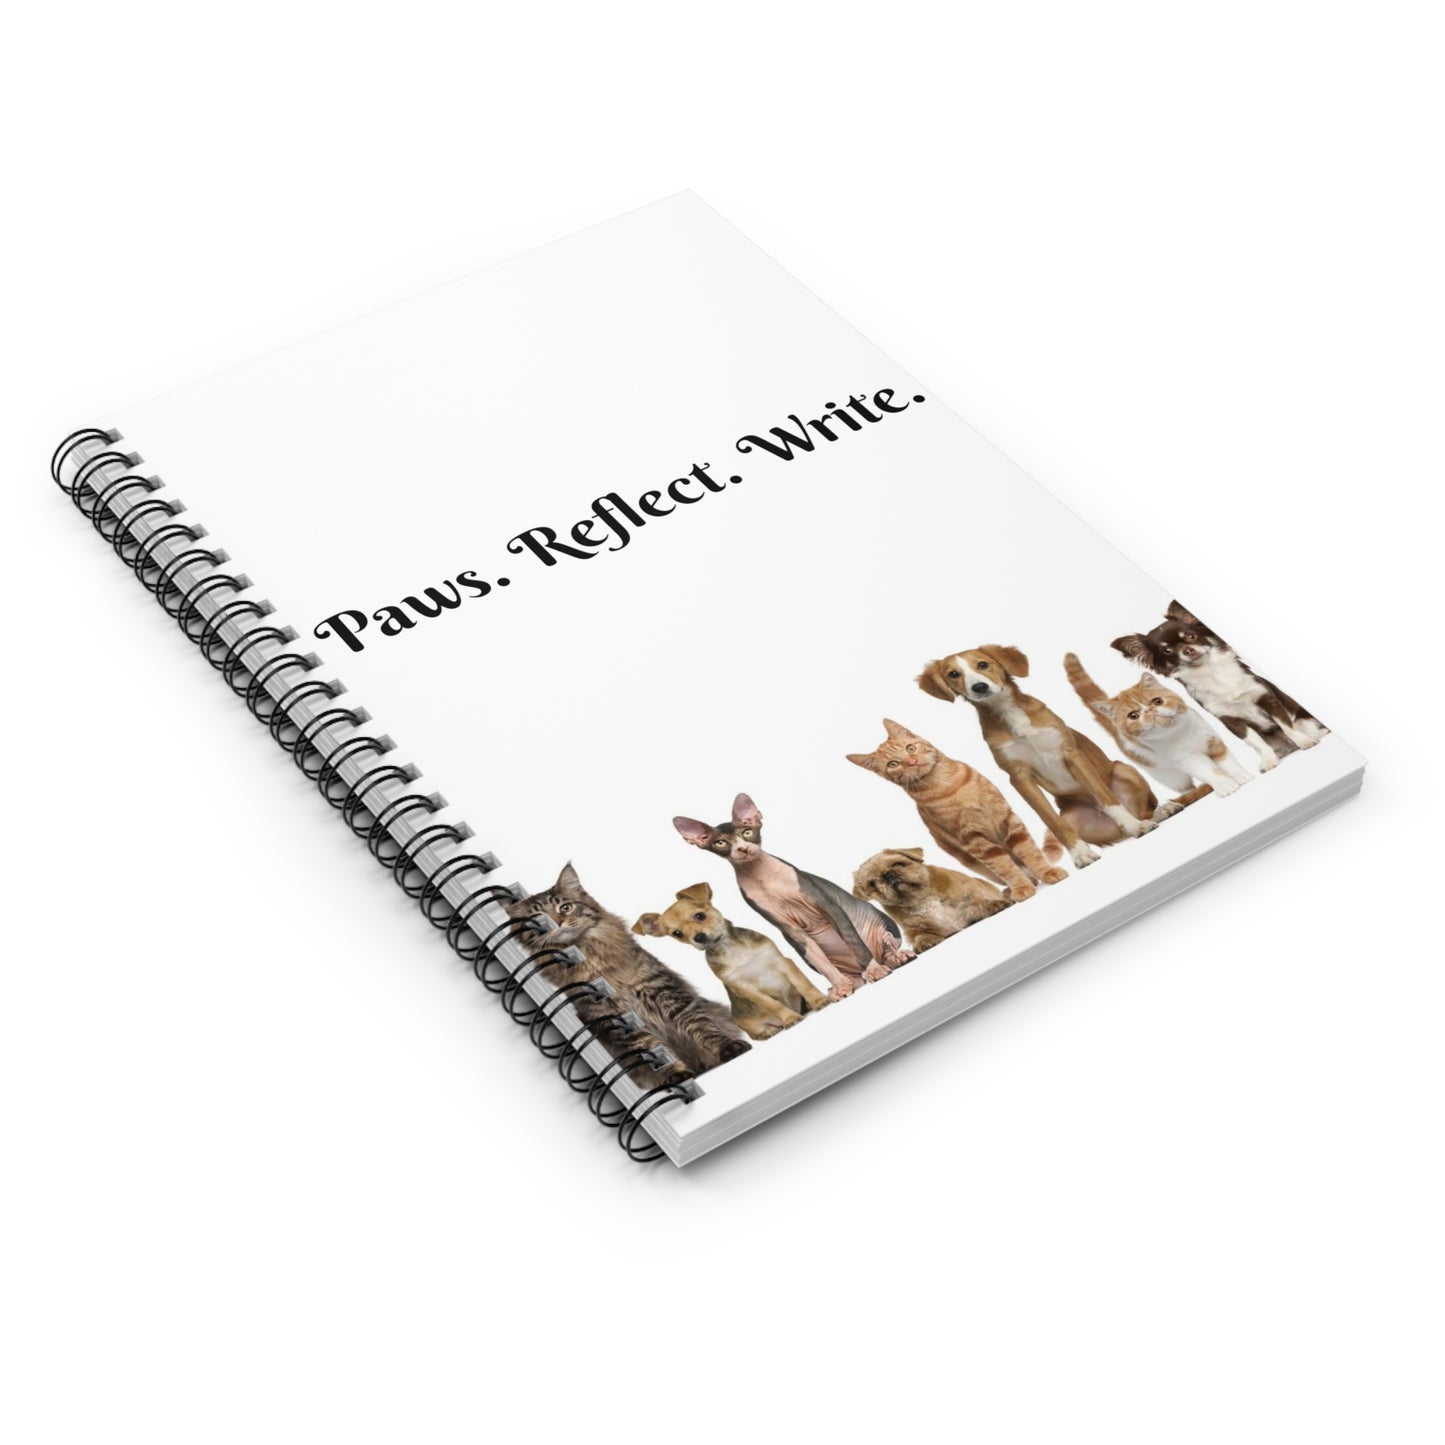 Paws. Reflect. Write.  Beloved Pets Spiral Notebook - Ruled Line